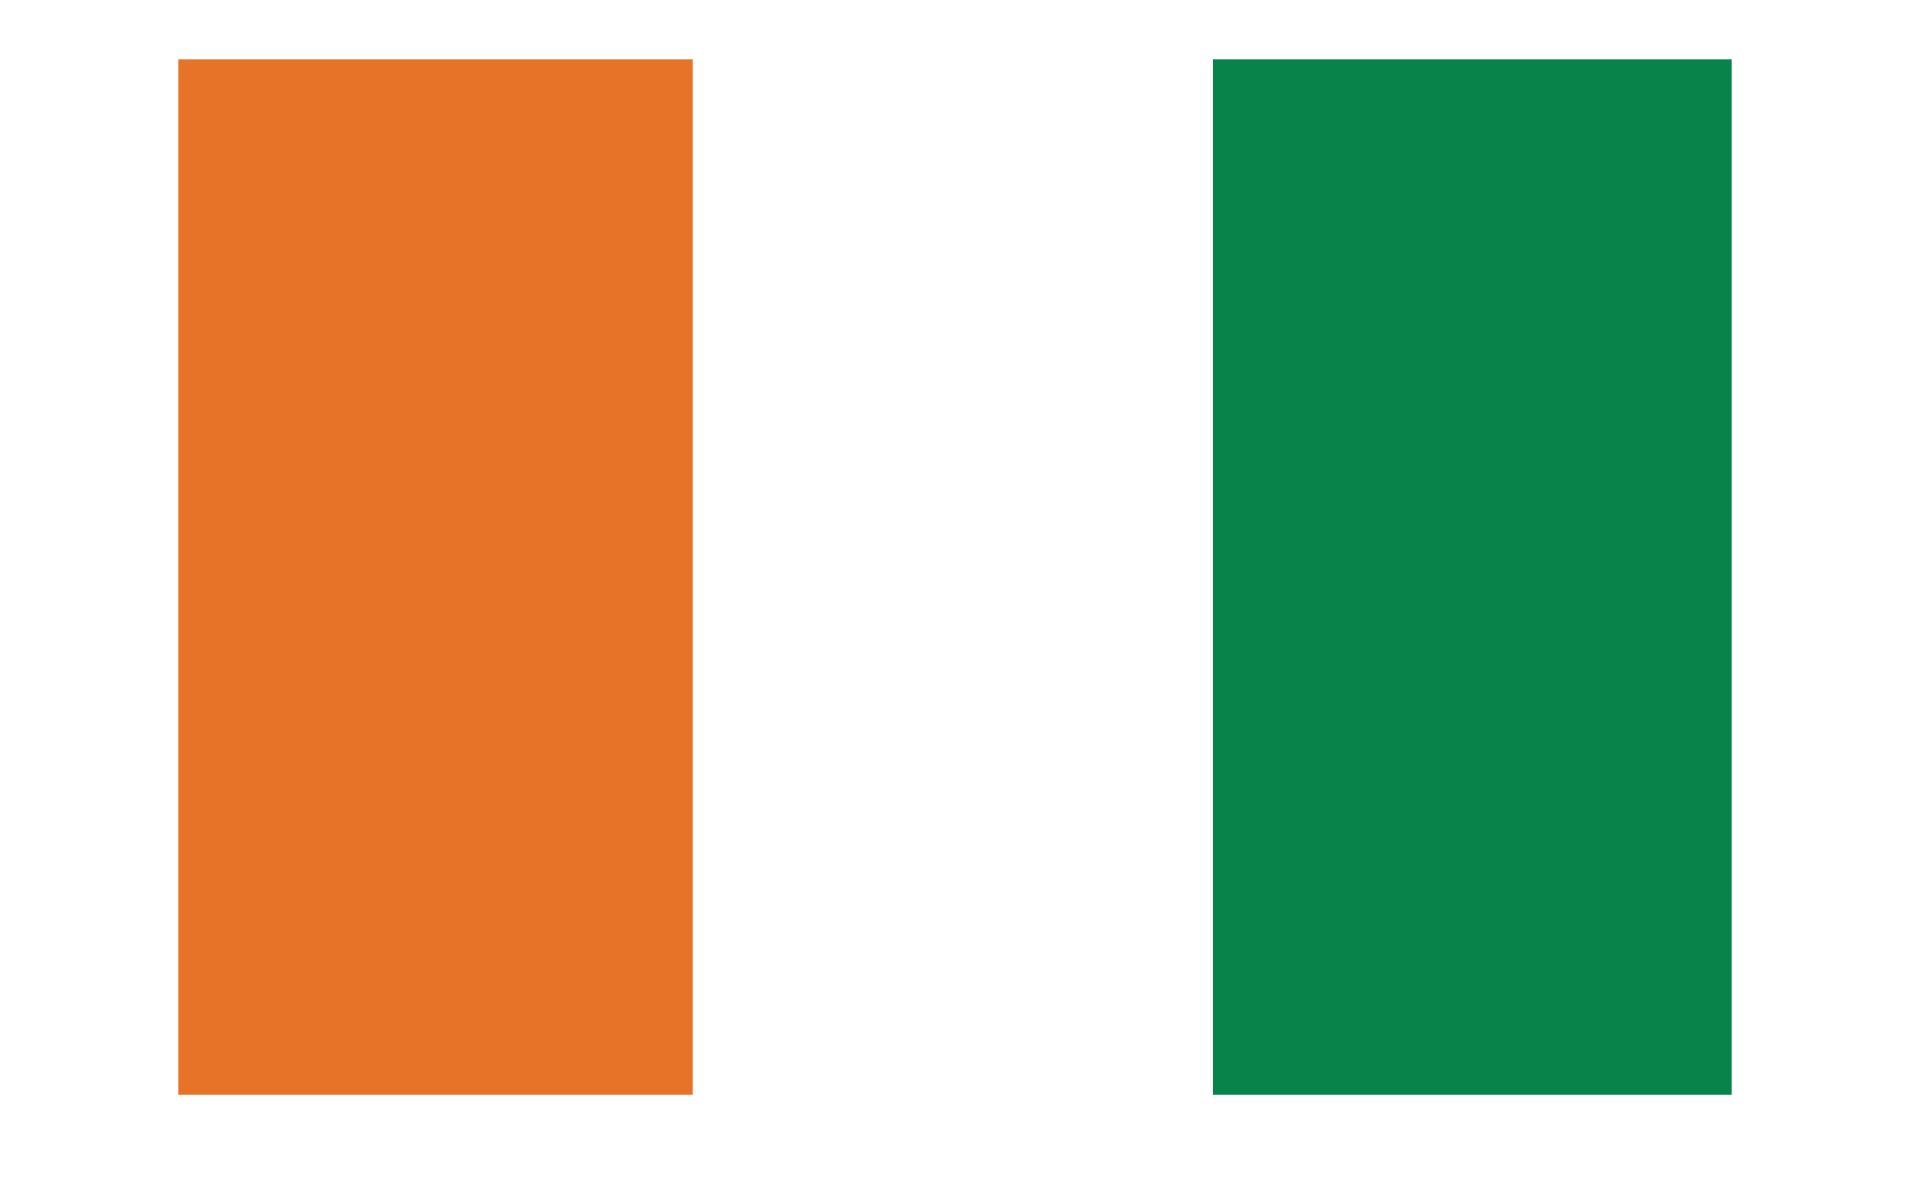 Download Ivory Coast Flag Png Images Transparent Gallery. Advertisement - Ivory Coast, Transparent background PNG HD thumbnail